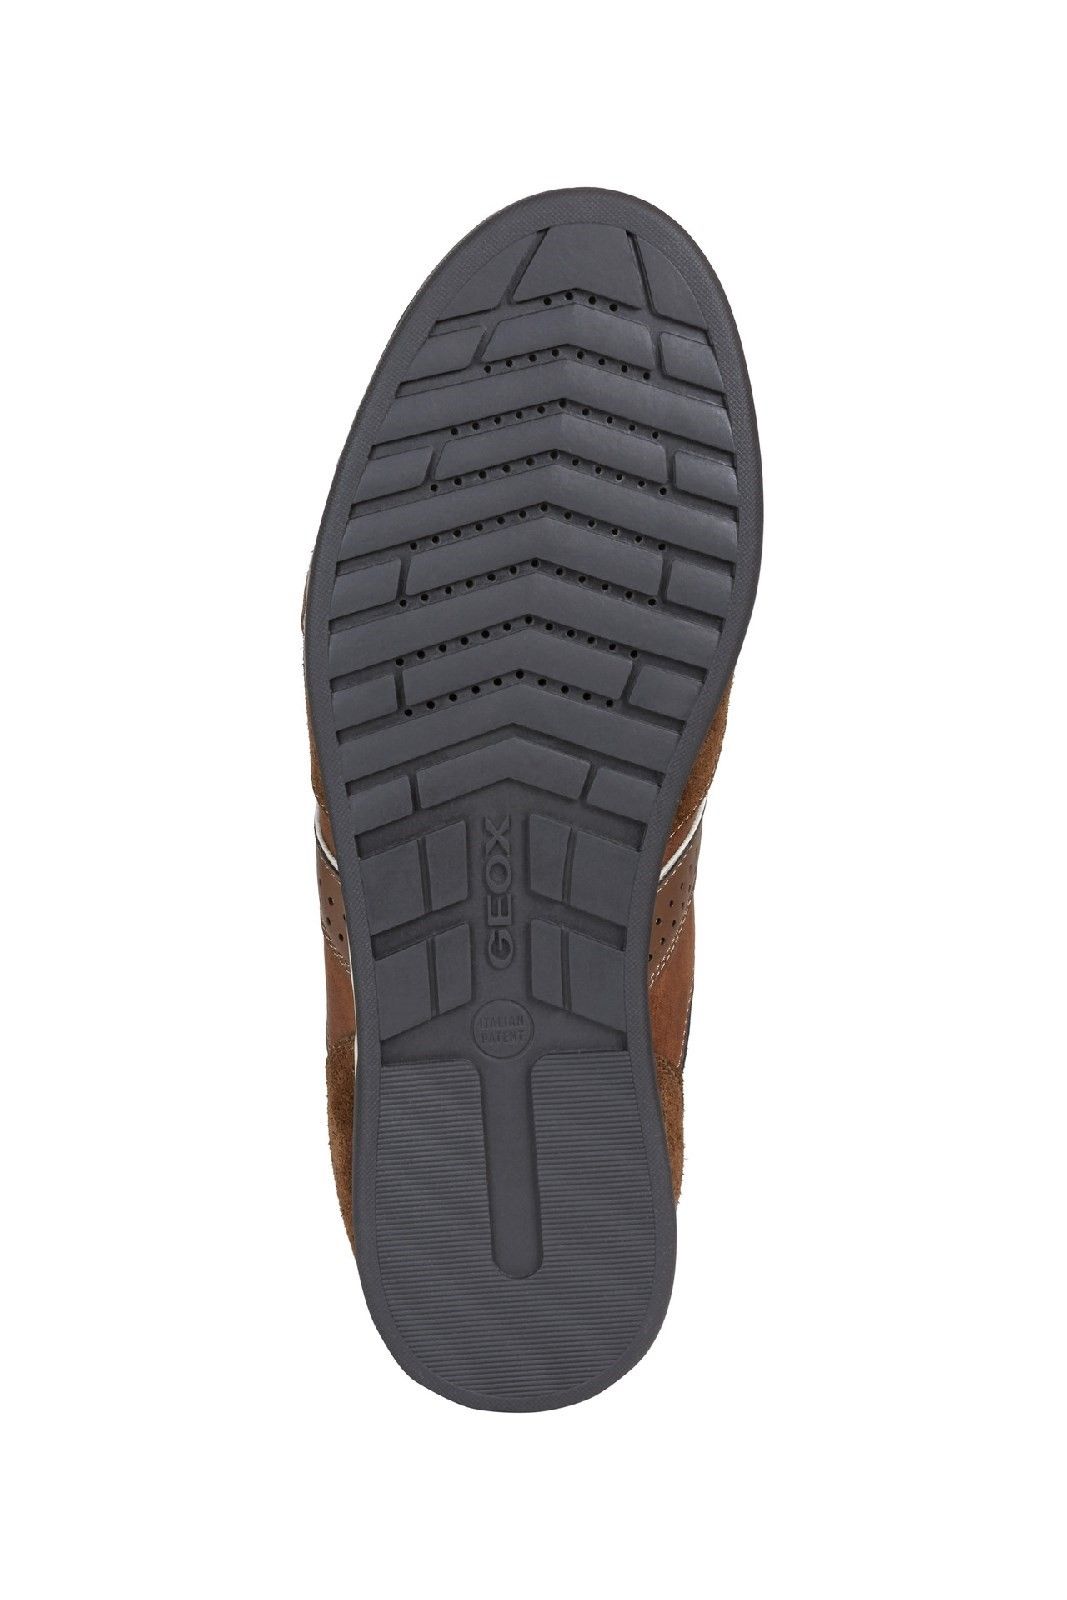 The Geox rubber sole is based on an exclusive patent: the combination of the perforated sole and the breathable and waterproof membrane allow natural temperature regulation, creating the perfect micro-climate that keeps feet dry and comfortable.Exclusive Technology. 
Perforated footbed. 
360 Degree breathability.